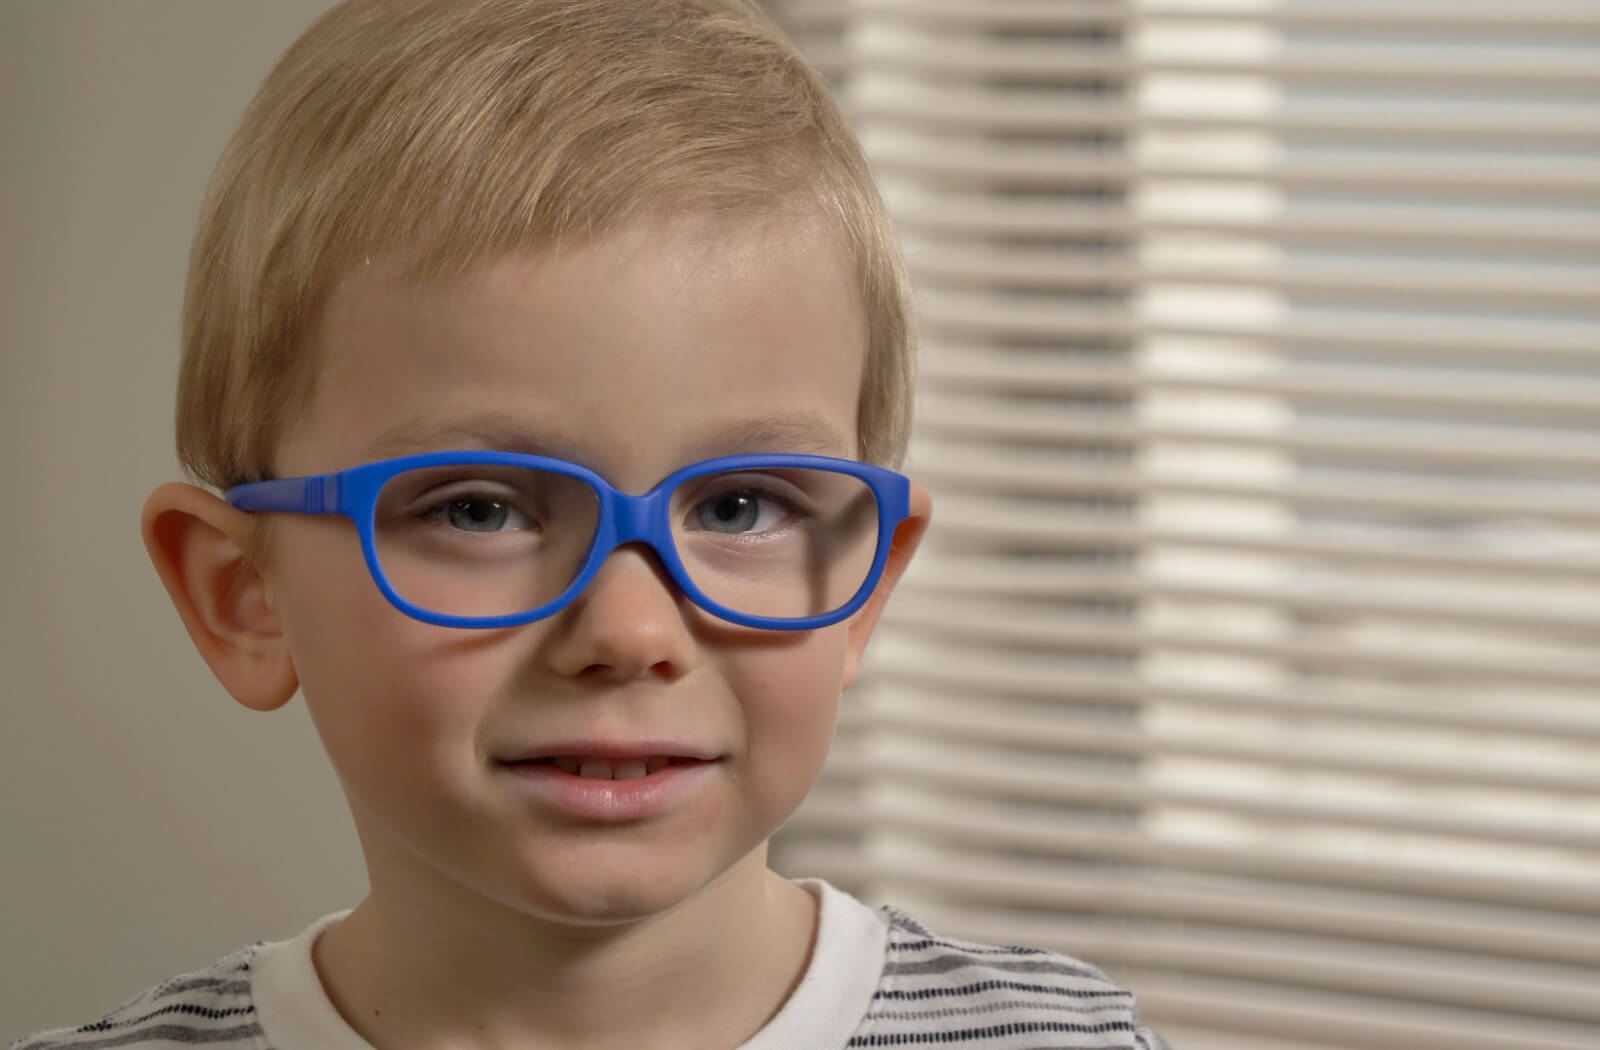 A close-up of a young boy wearing blue-framed myopia control eyeglasses.